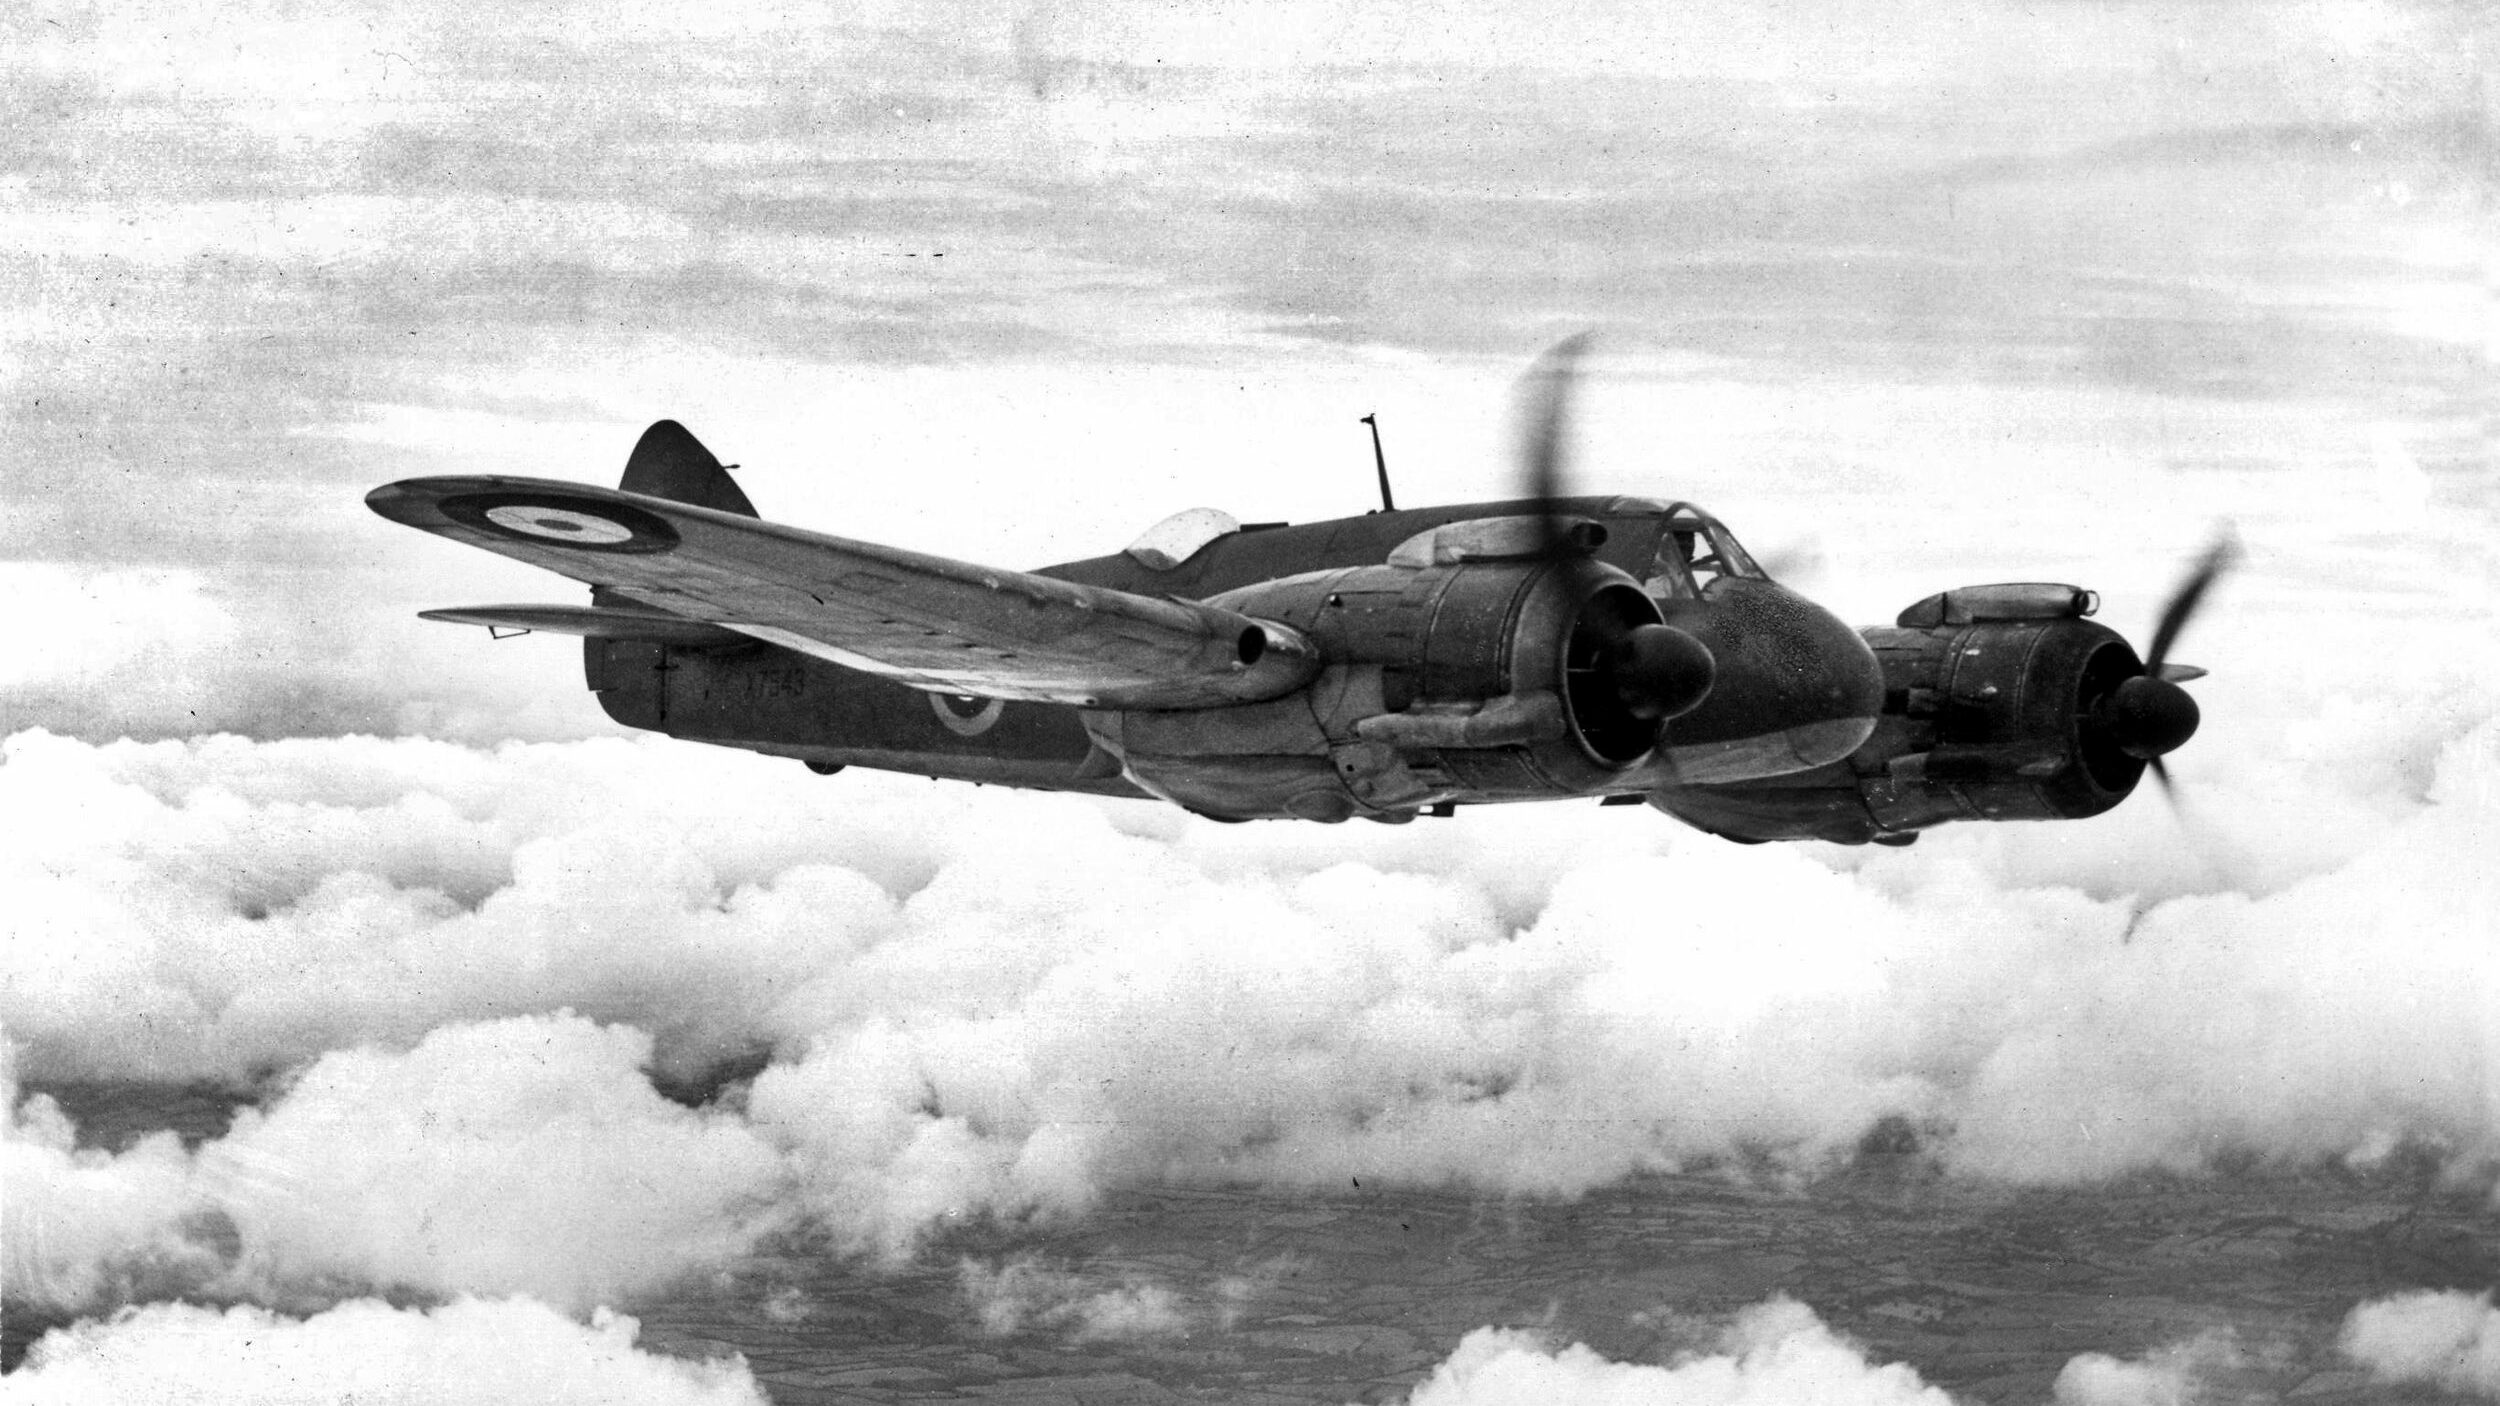 The Bristol Beaufighter was a large aircraft that was capable of carrying heavy armament and an early version of airborne interception radar without affecting the aircraft’s performance in action.